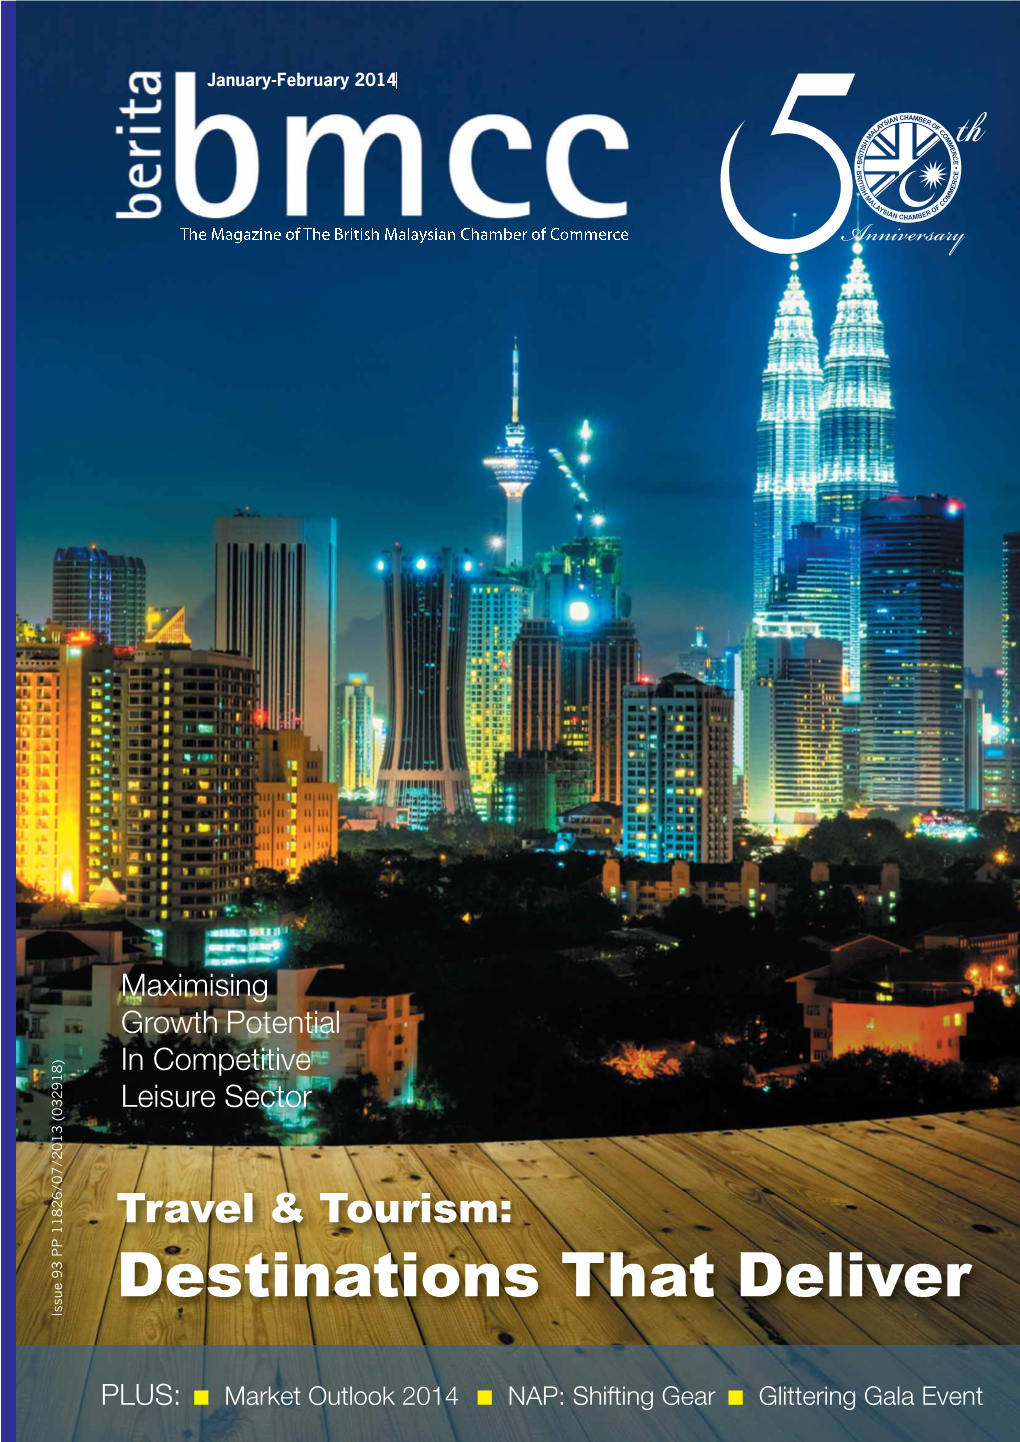 Destinations That Deliver Issue 93 PP 11826/07/2013 (032918)